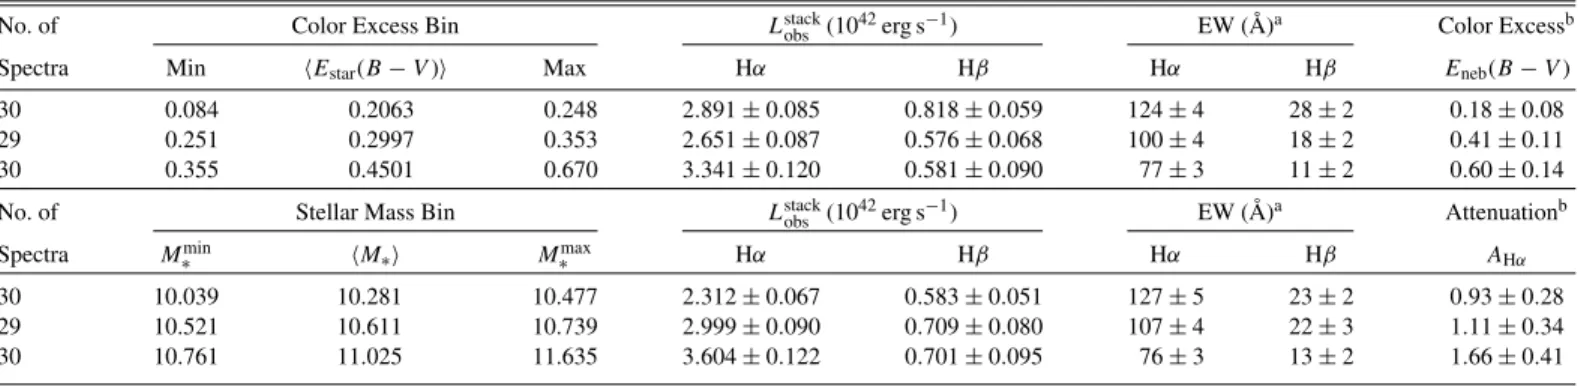 Table 1 of the published paper also contains errors in some values. While most are within the original error being reported, the most significant correction is the attenuation A Hα for the lowest mass bin, which is now reported as 0.93.